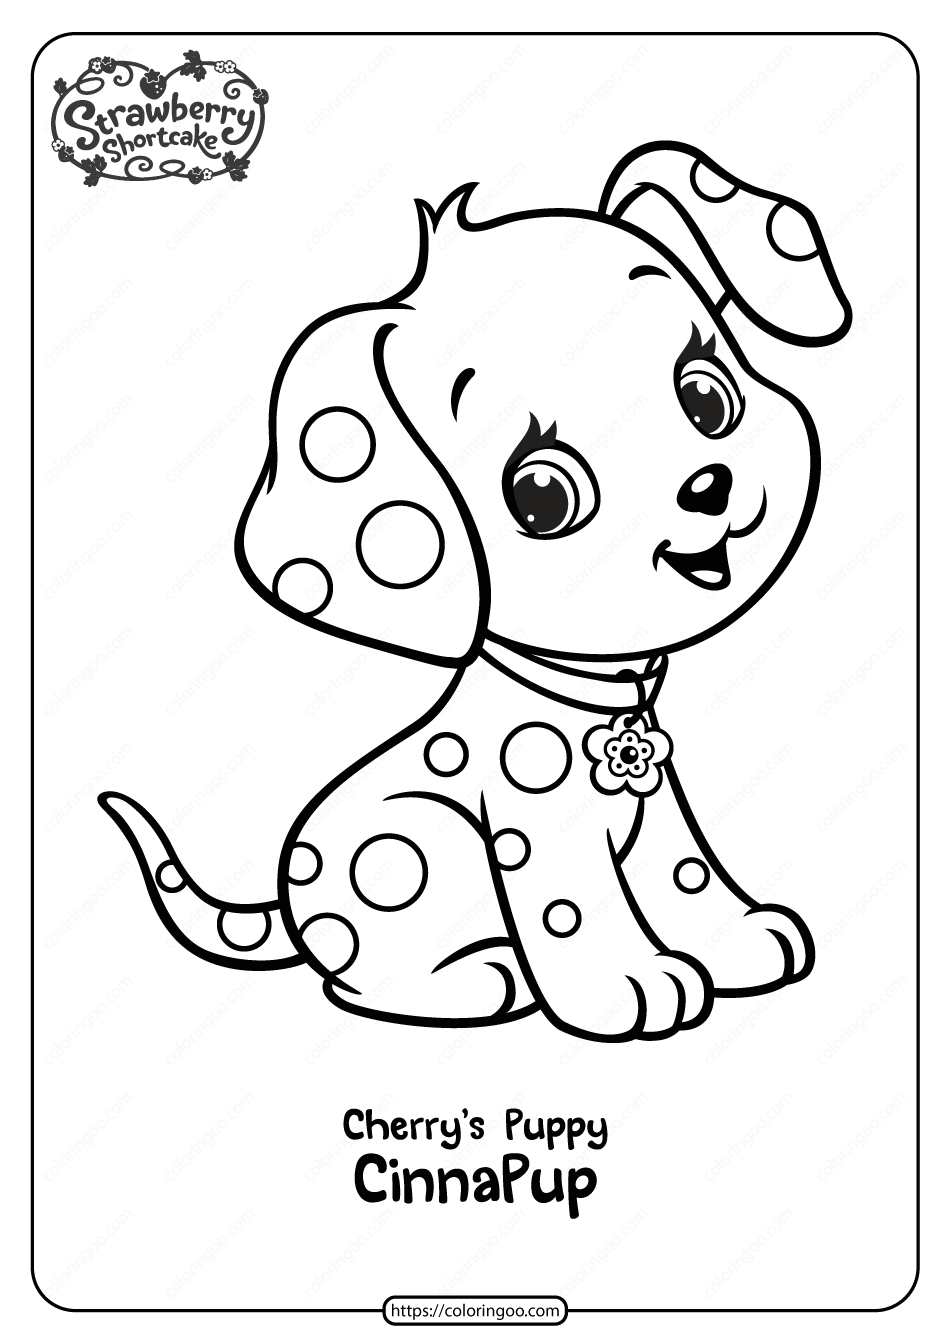 Free Printable Cherry’s Puppy Cinnapup Coloring Page